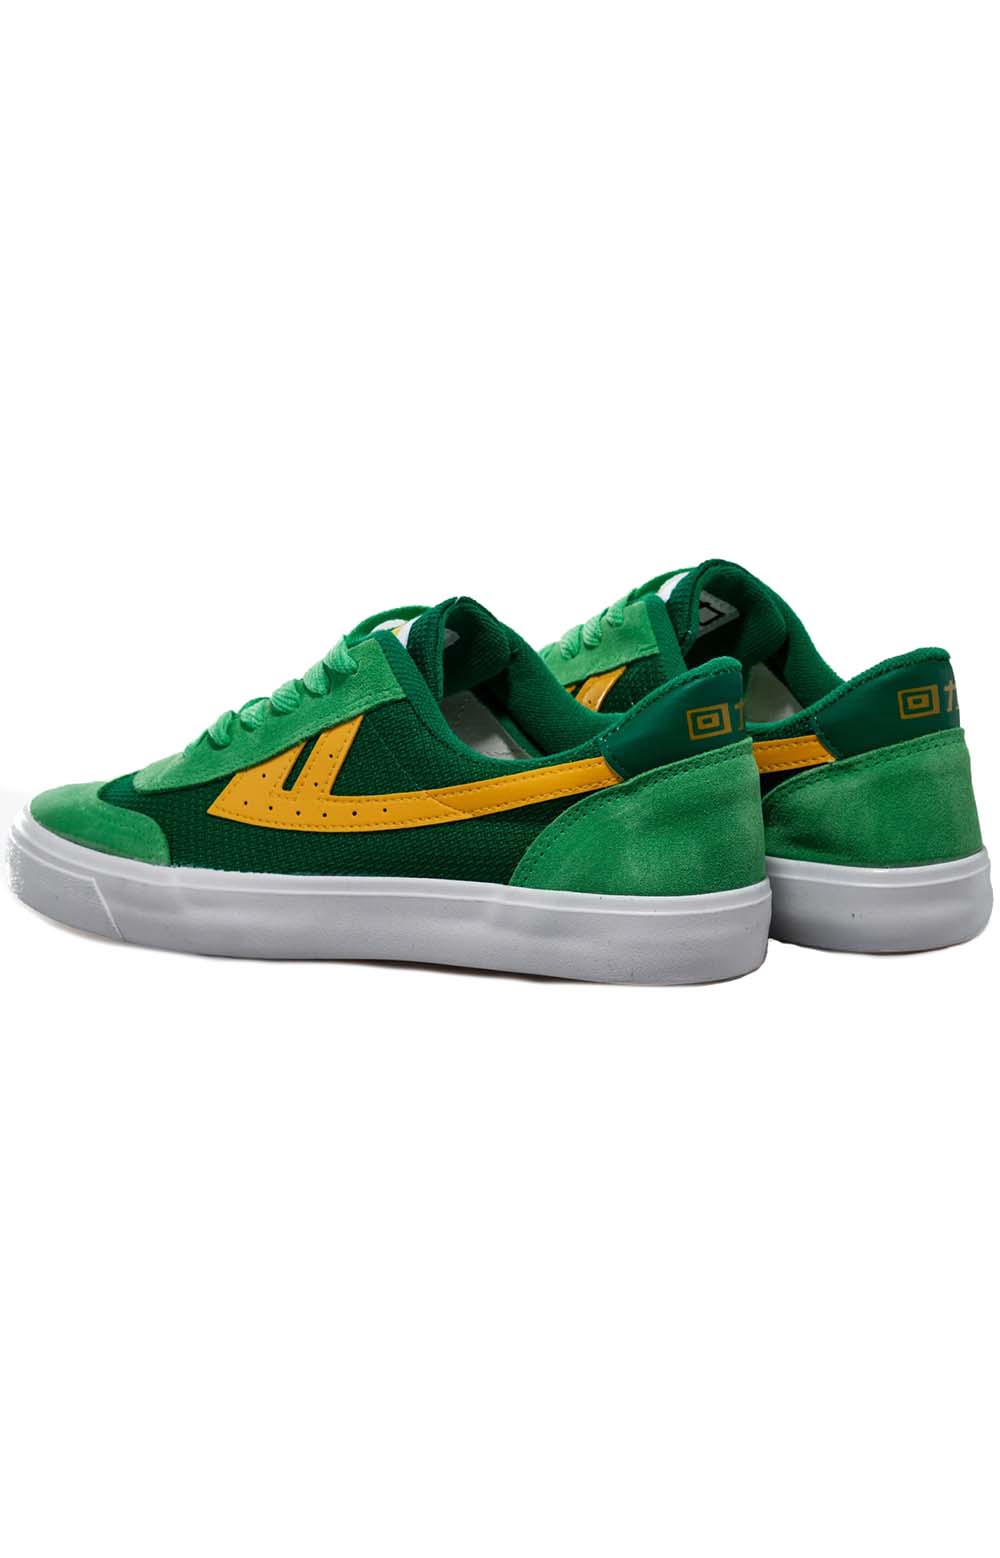 Ace Shoes - Green/Yellow